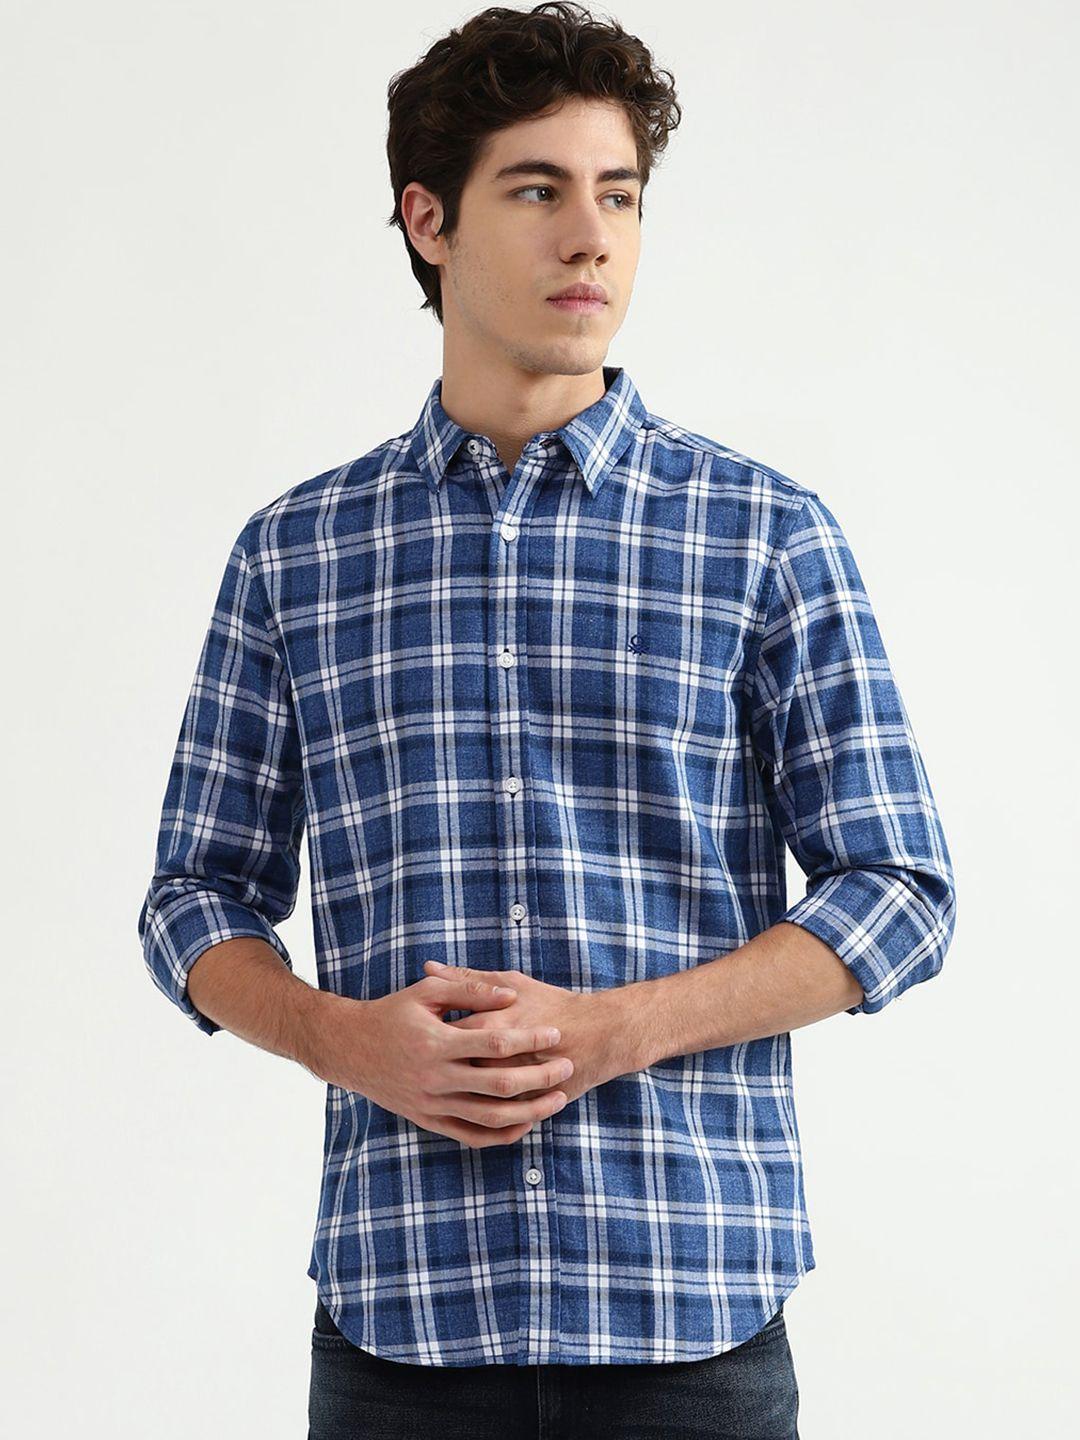 united colors of benetton men blue & white tartan checked casual shirt